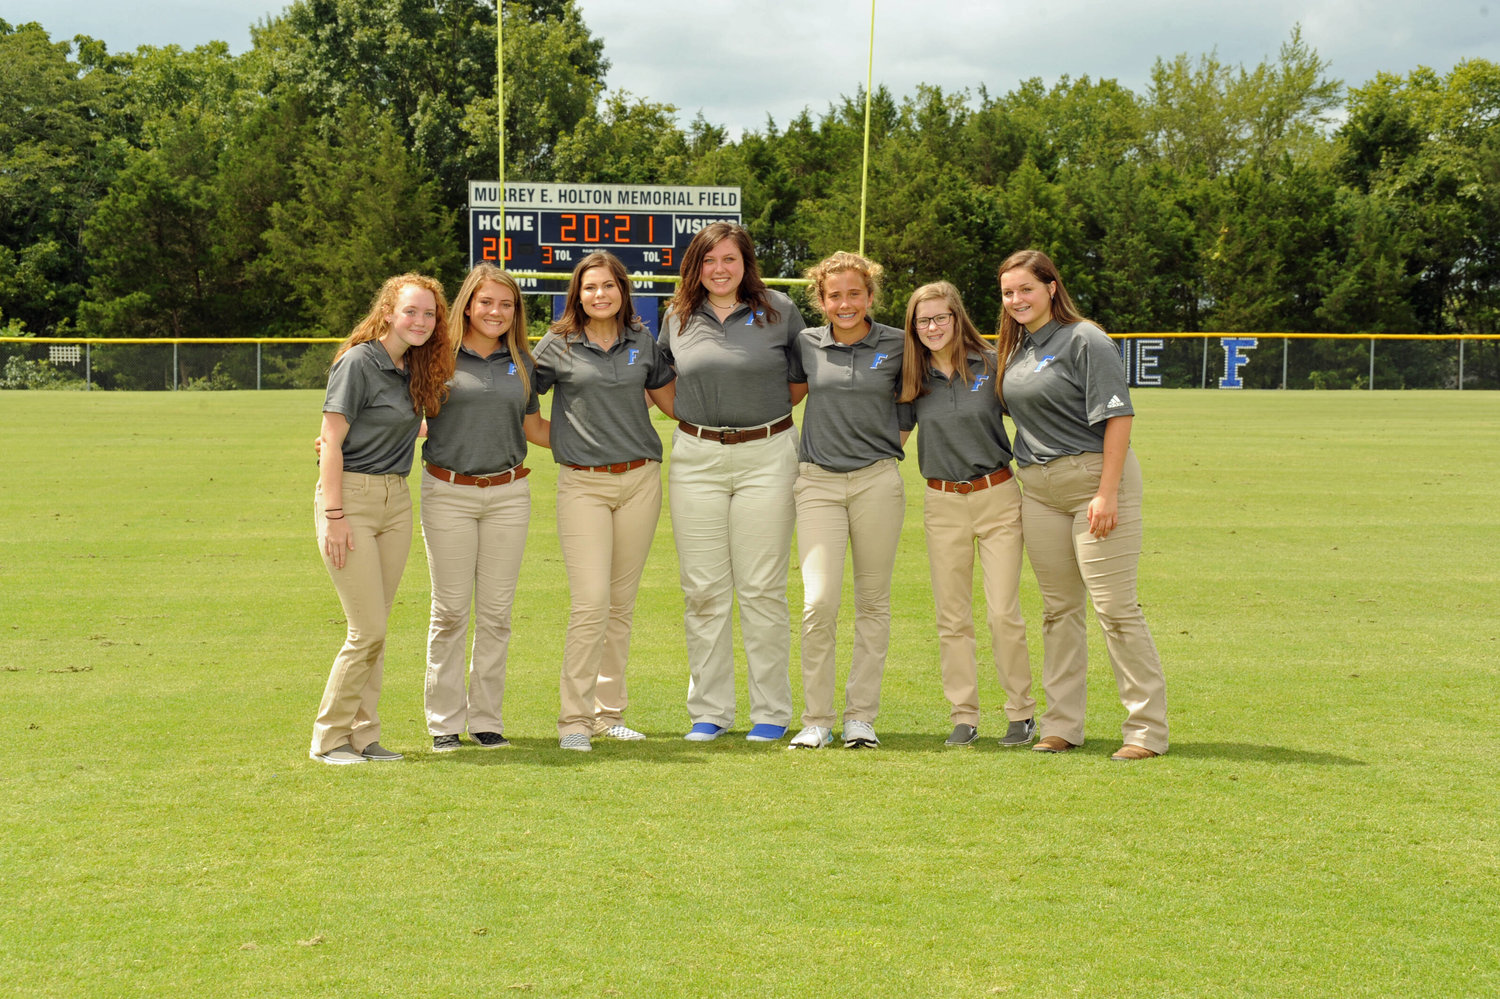 The 2020 Forrest football managers from left are, Becca Clark, Julie Williams, Madison Cormier, Baylee Fuller, Annie Thrasher, McKenzie Pratt, and Bella Hosford.